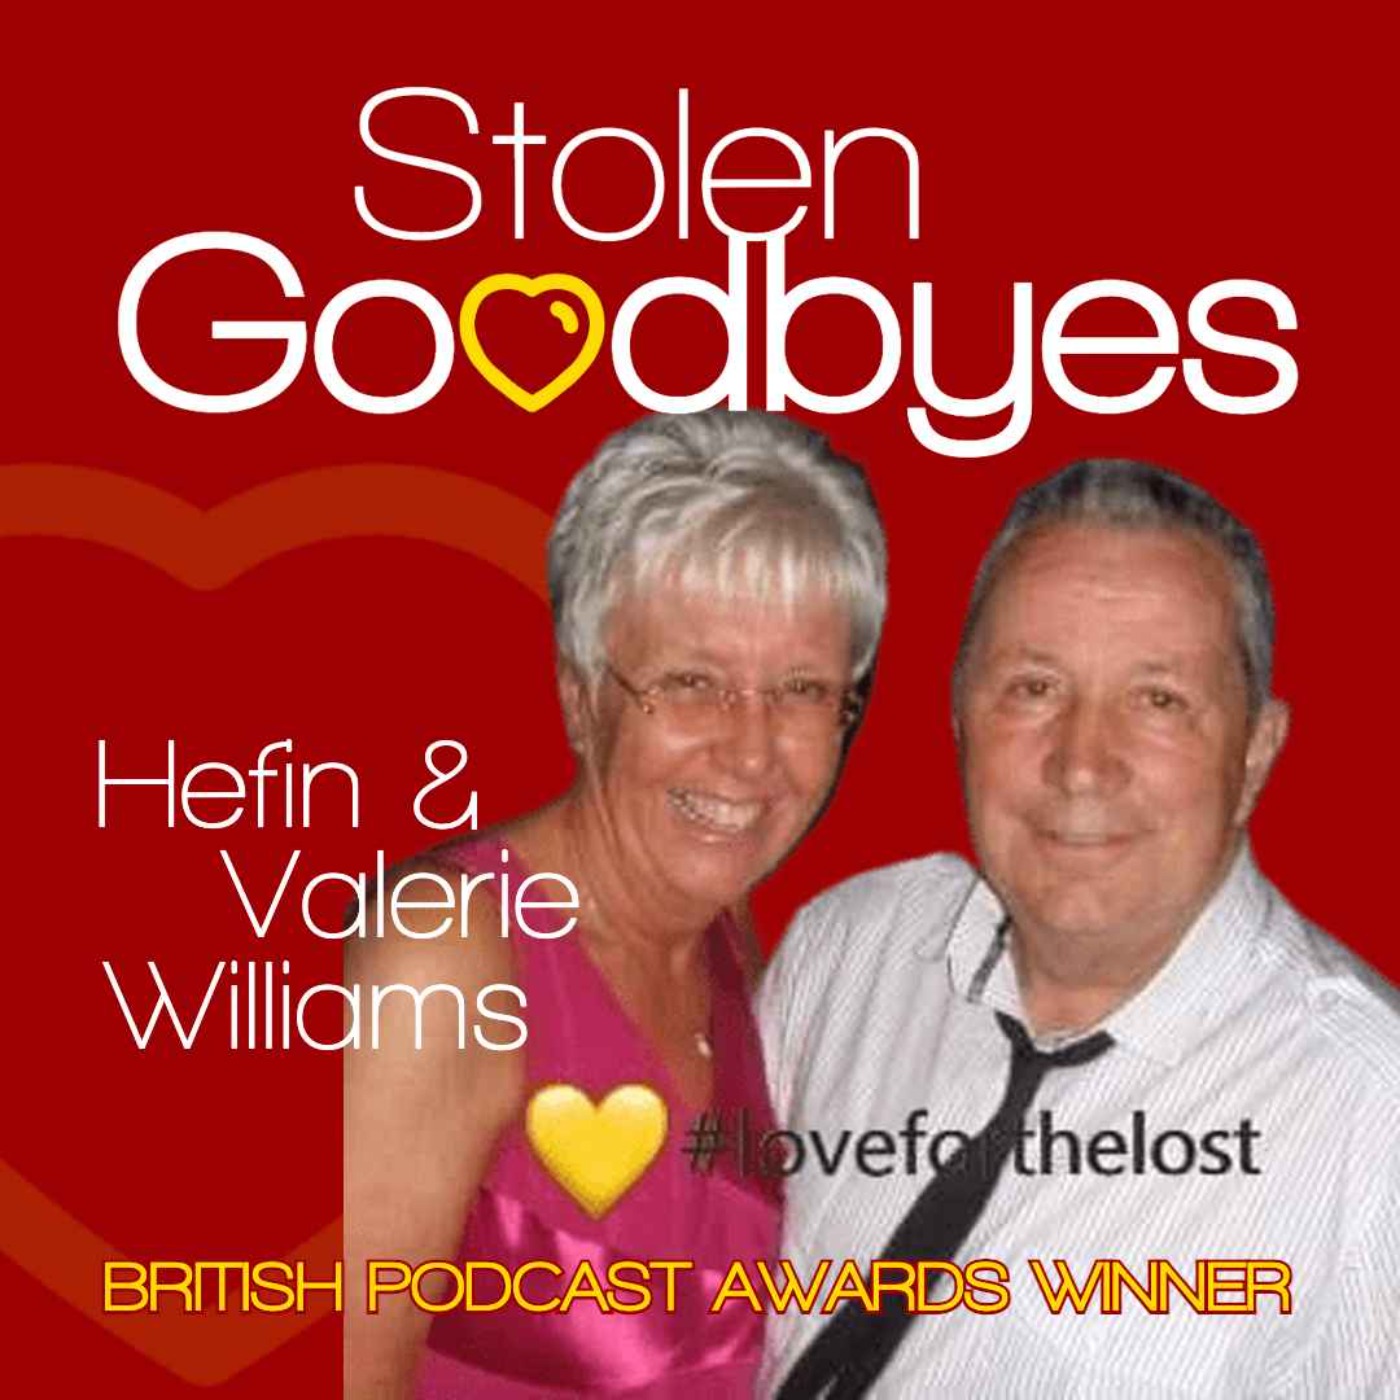 Hefin and Valerie Williams